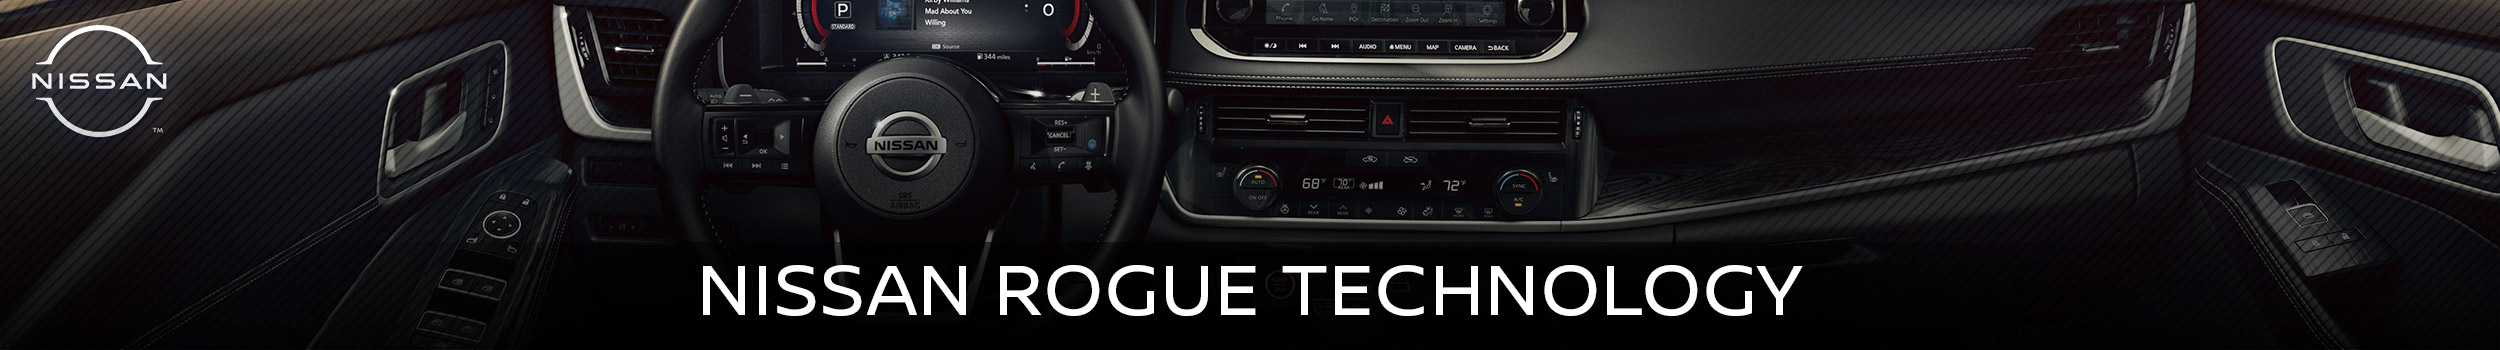 Nissan Rogue Technology | Galesburg Nissan | Galesburg, IL